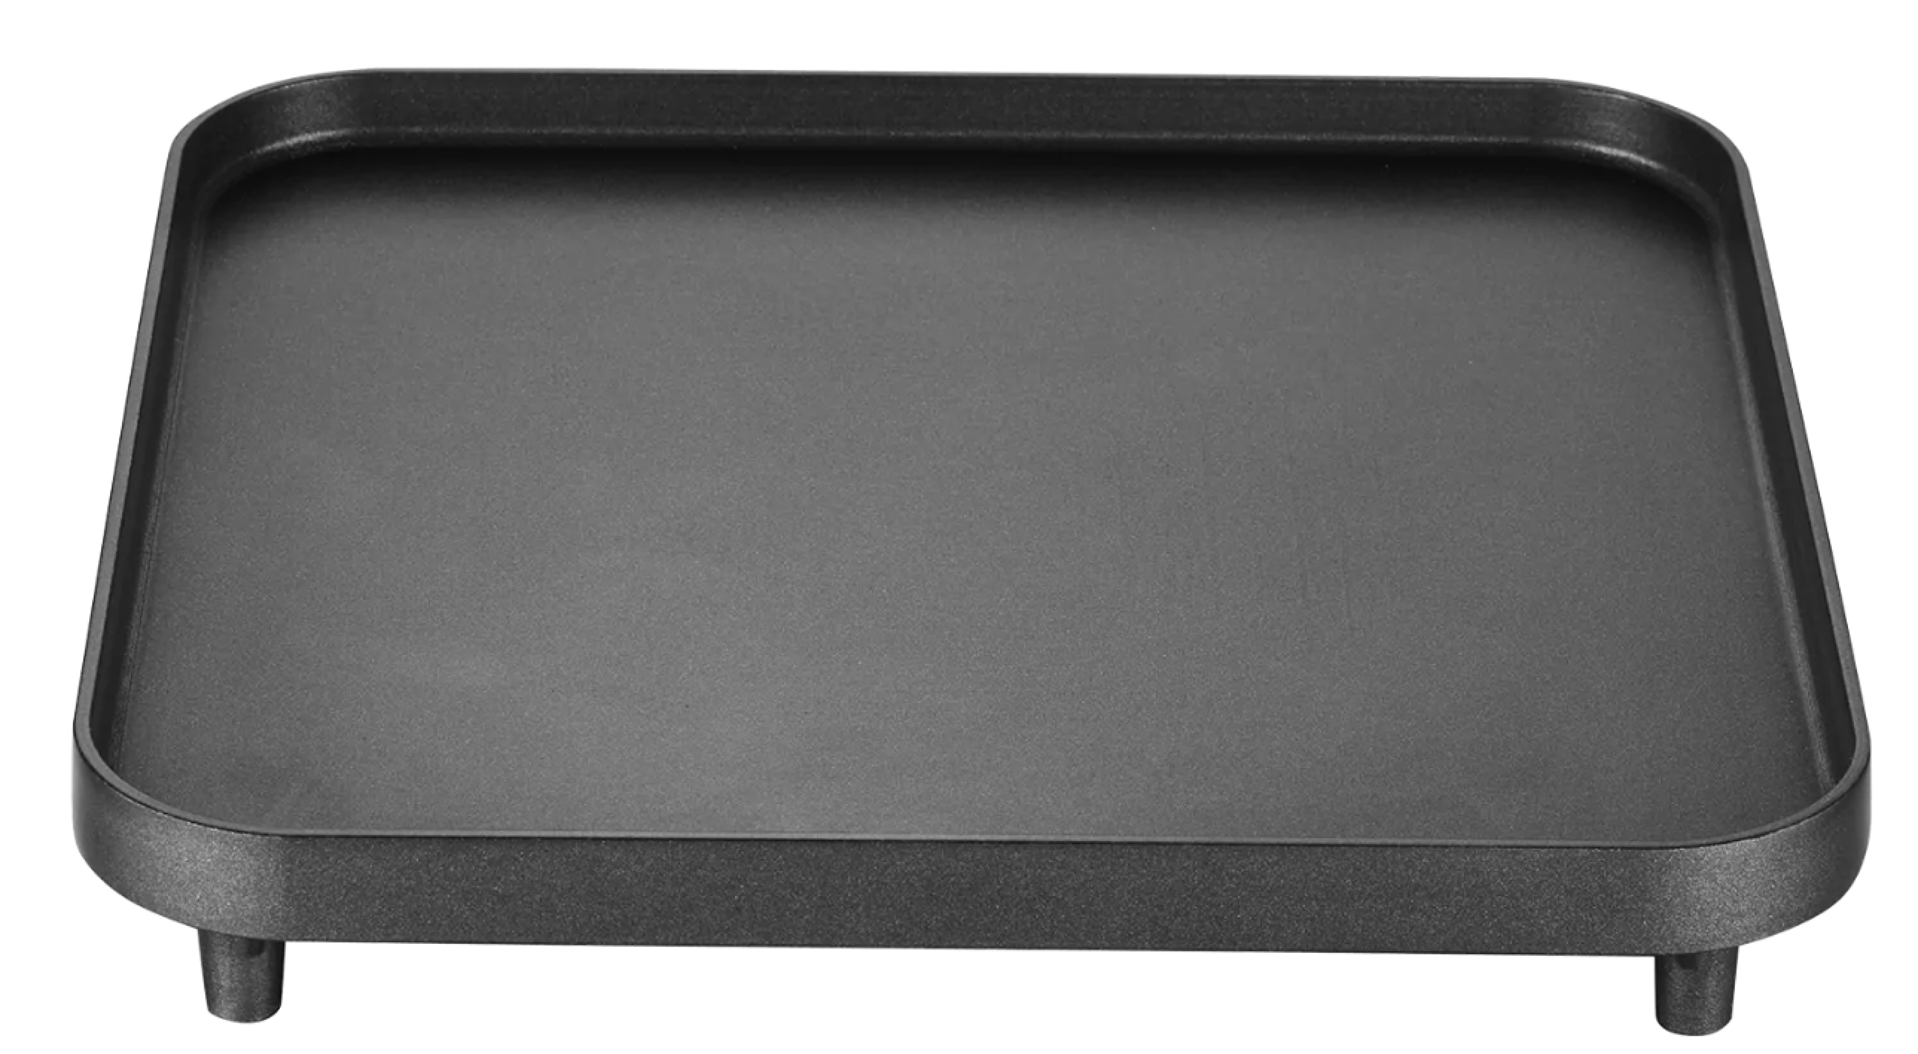 Cadac Flat Grill plate 2-Cook